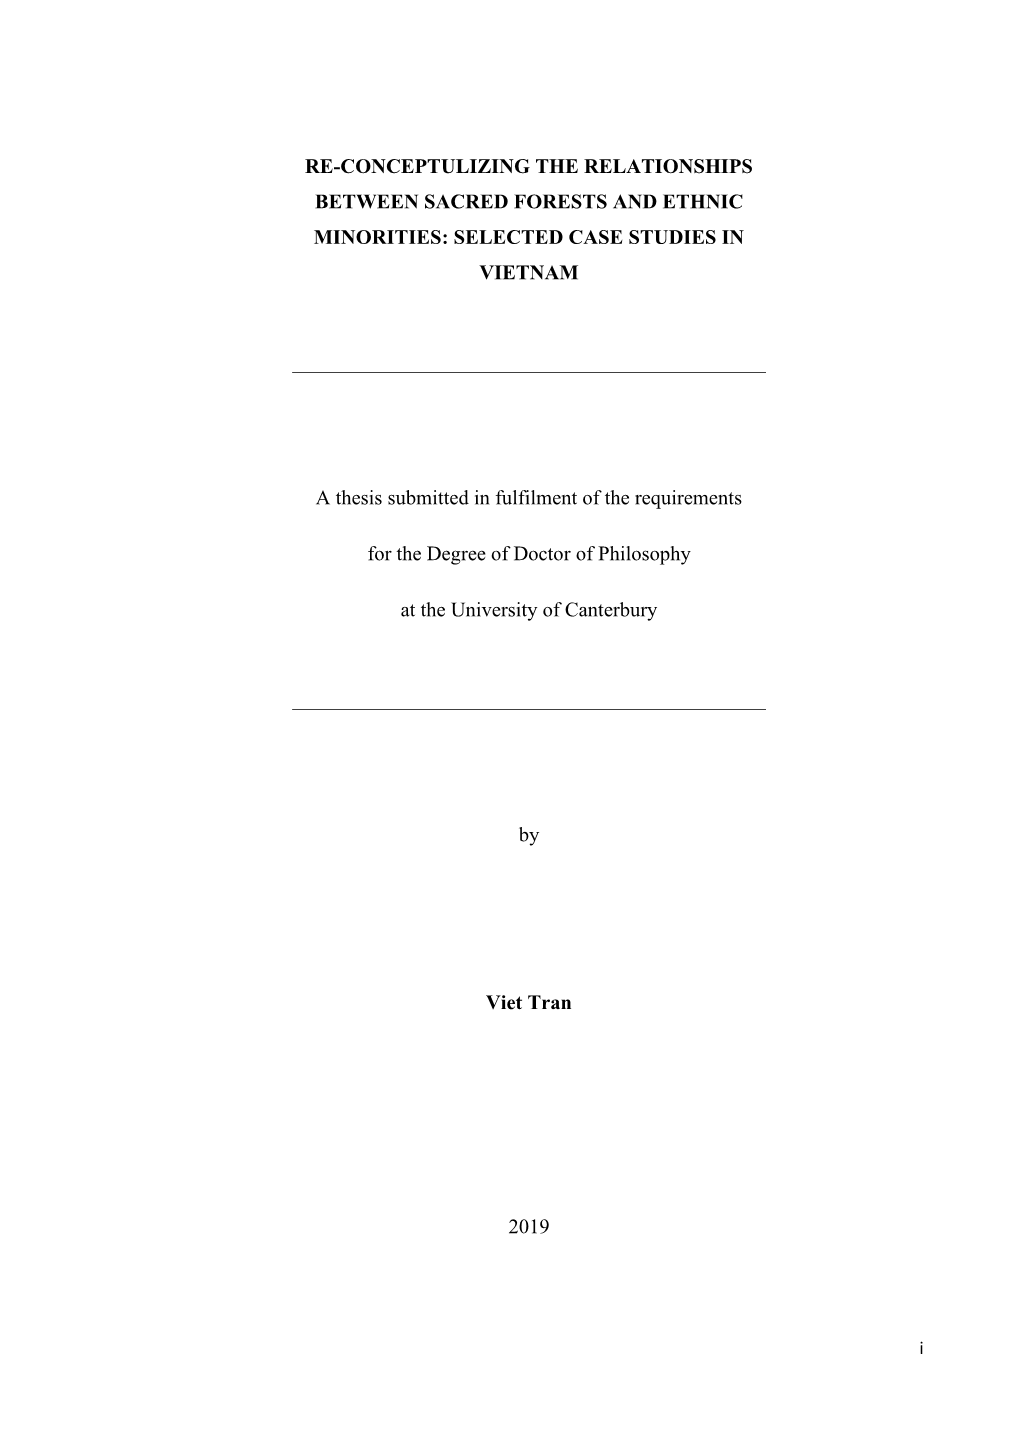 SELECTED CASE STUDIES in VIETNAM a Thesis Subm